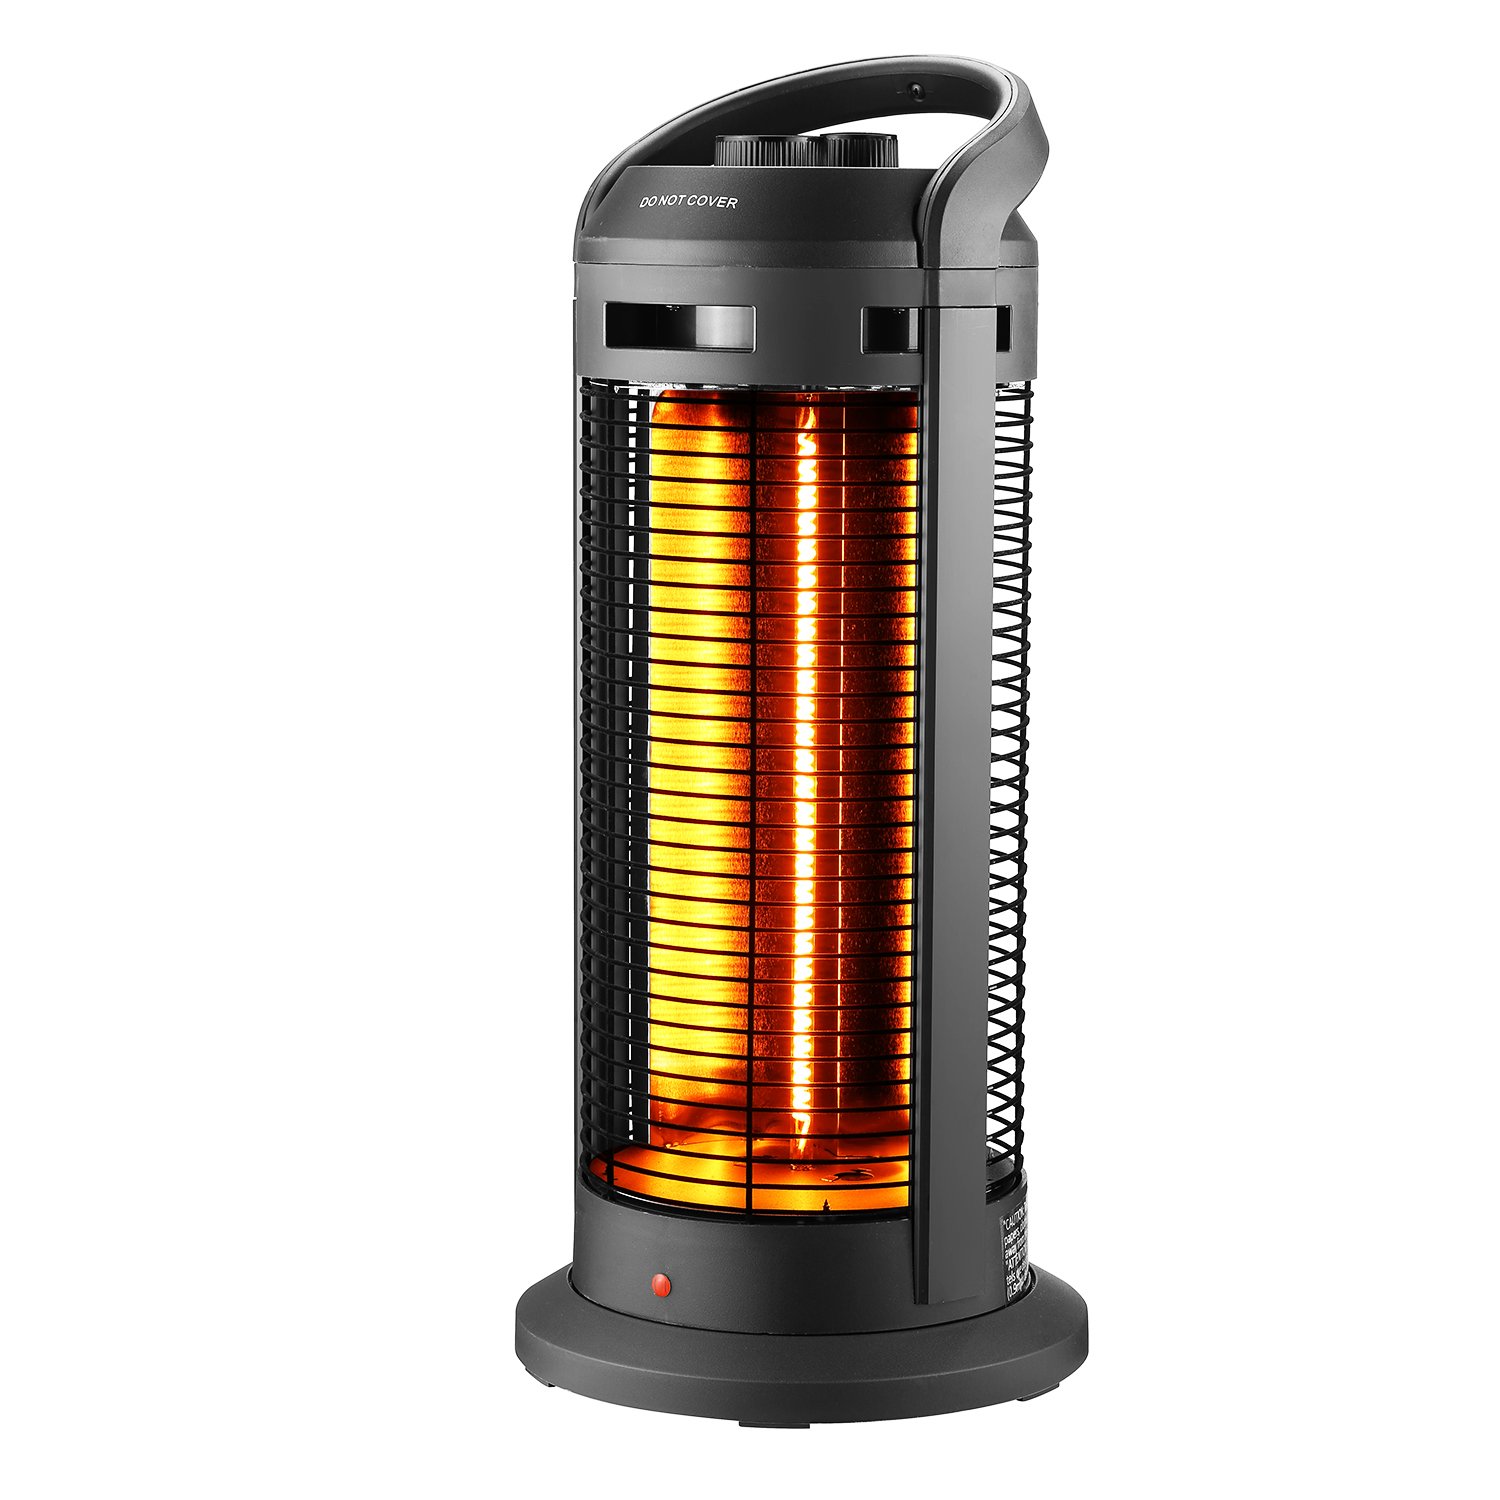 Ainfox Has 24inch Space Heater For $19.99+Free Shipping